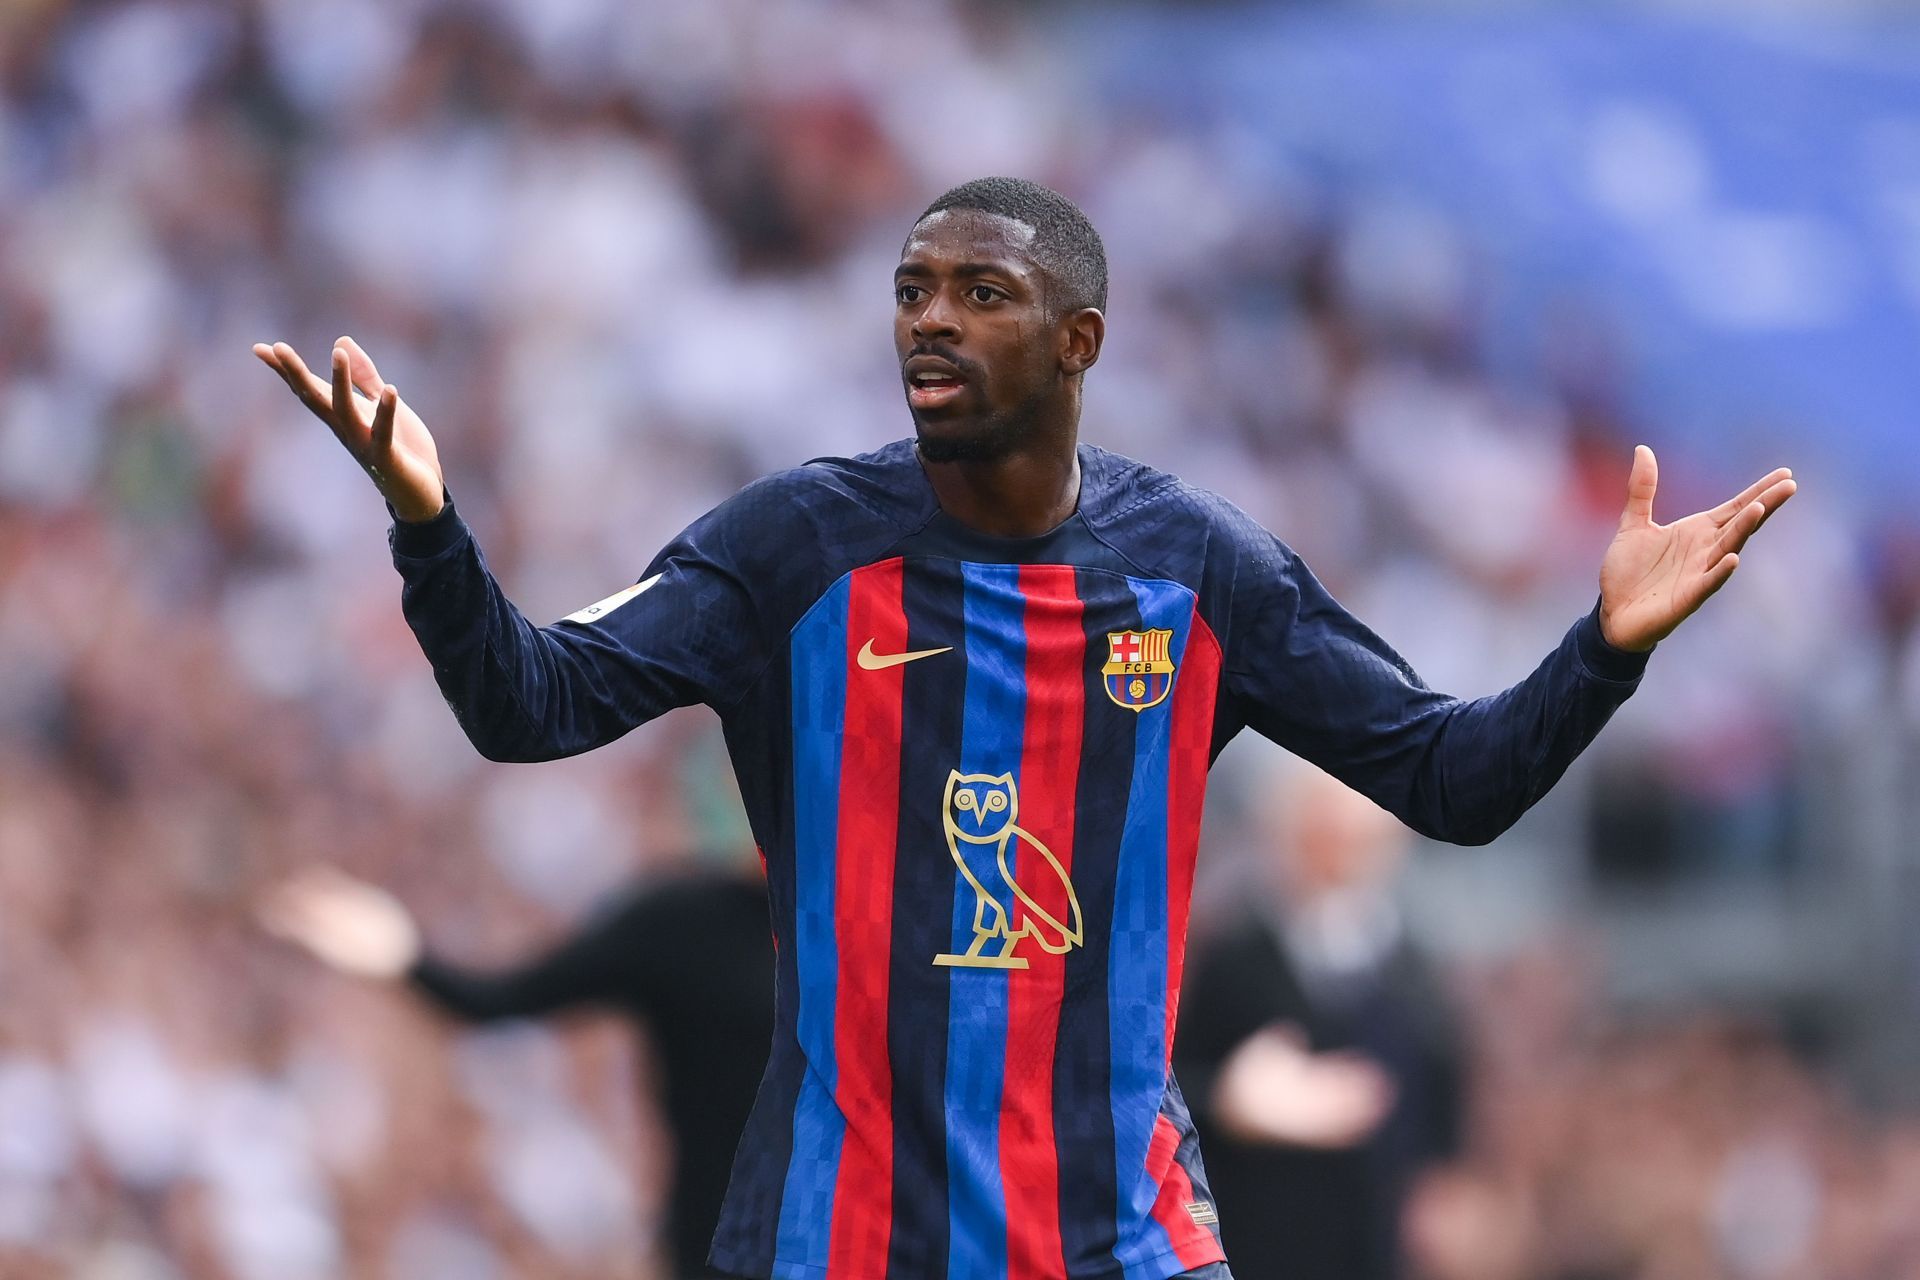 The Gunners have an interest in Ousmane Dembele.